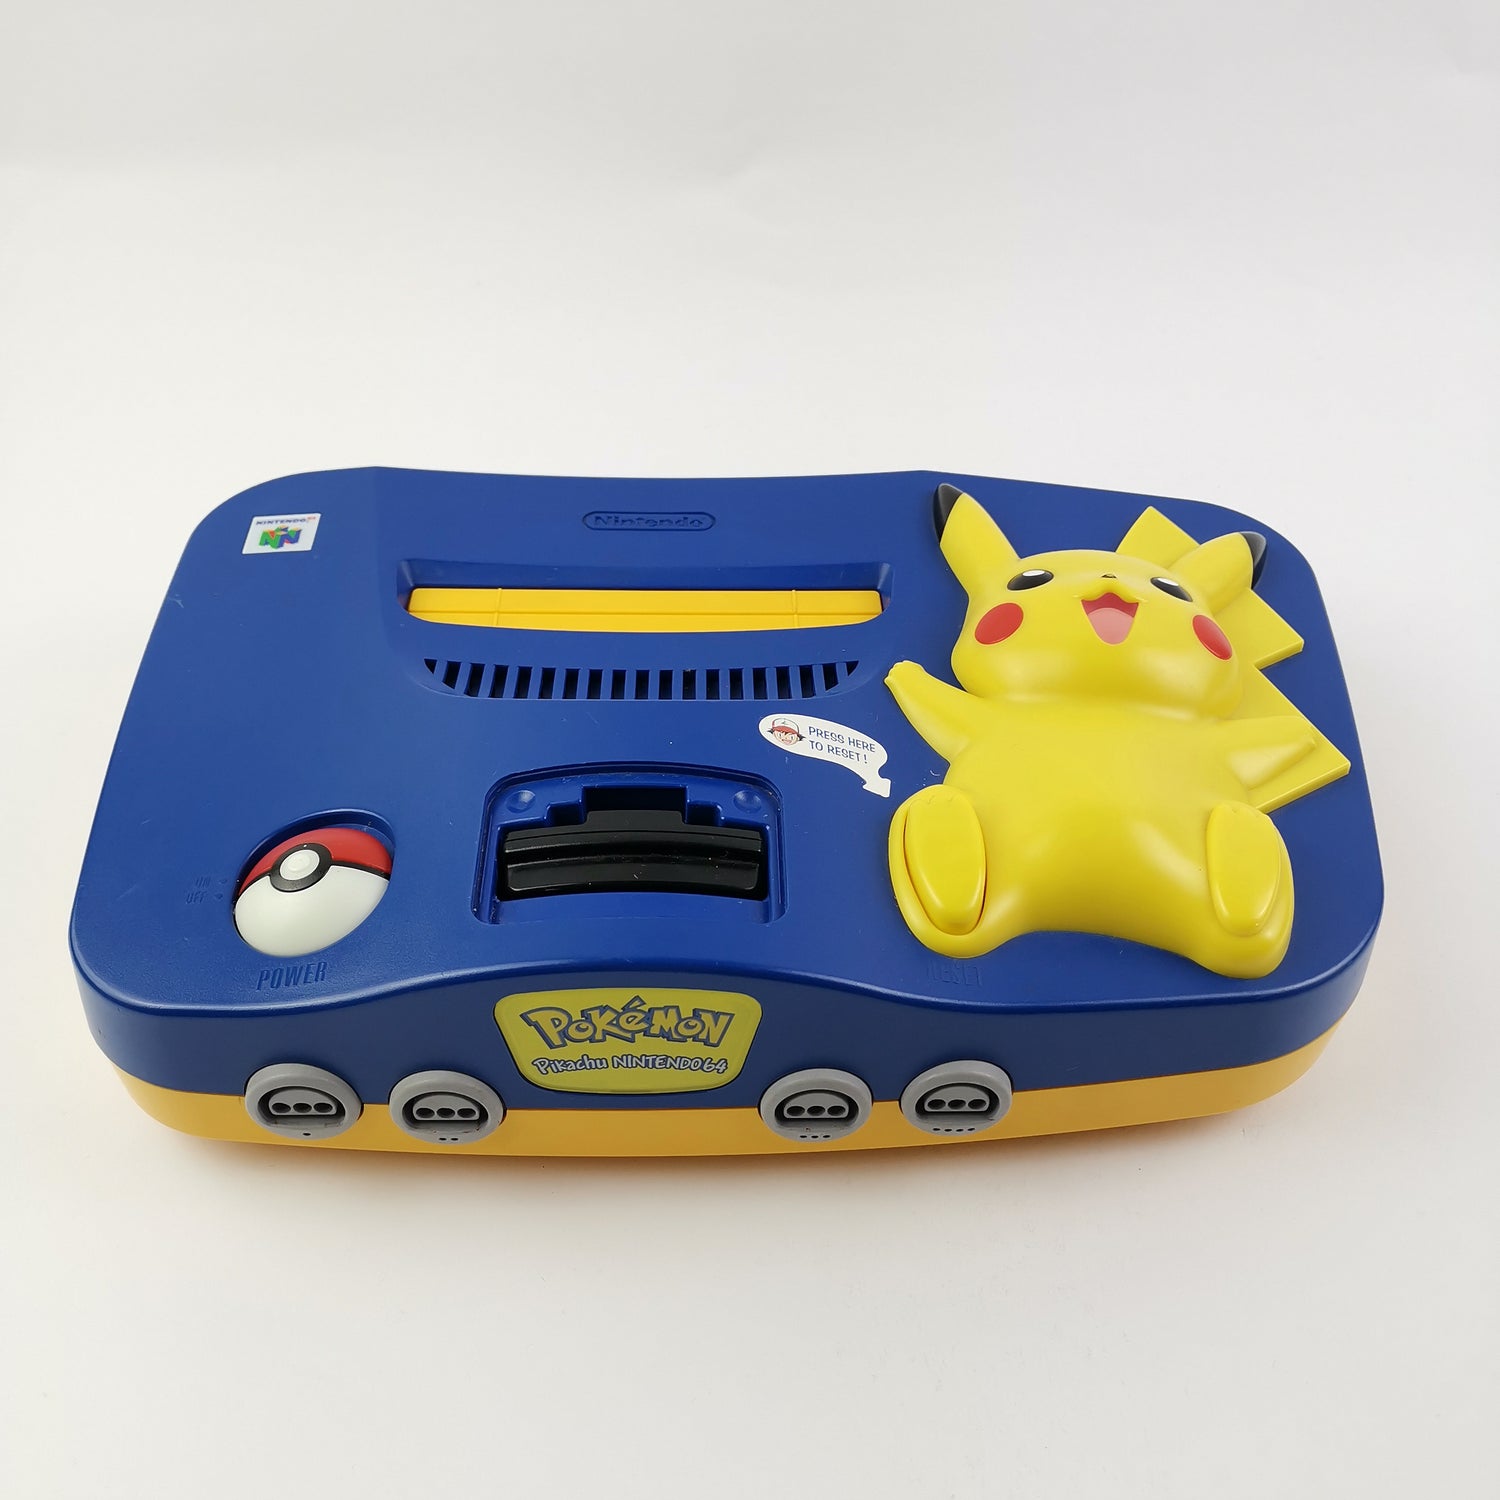 Nintendo 64 console: Pokemon Pikachu Edition with original controller and cable